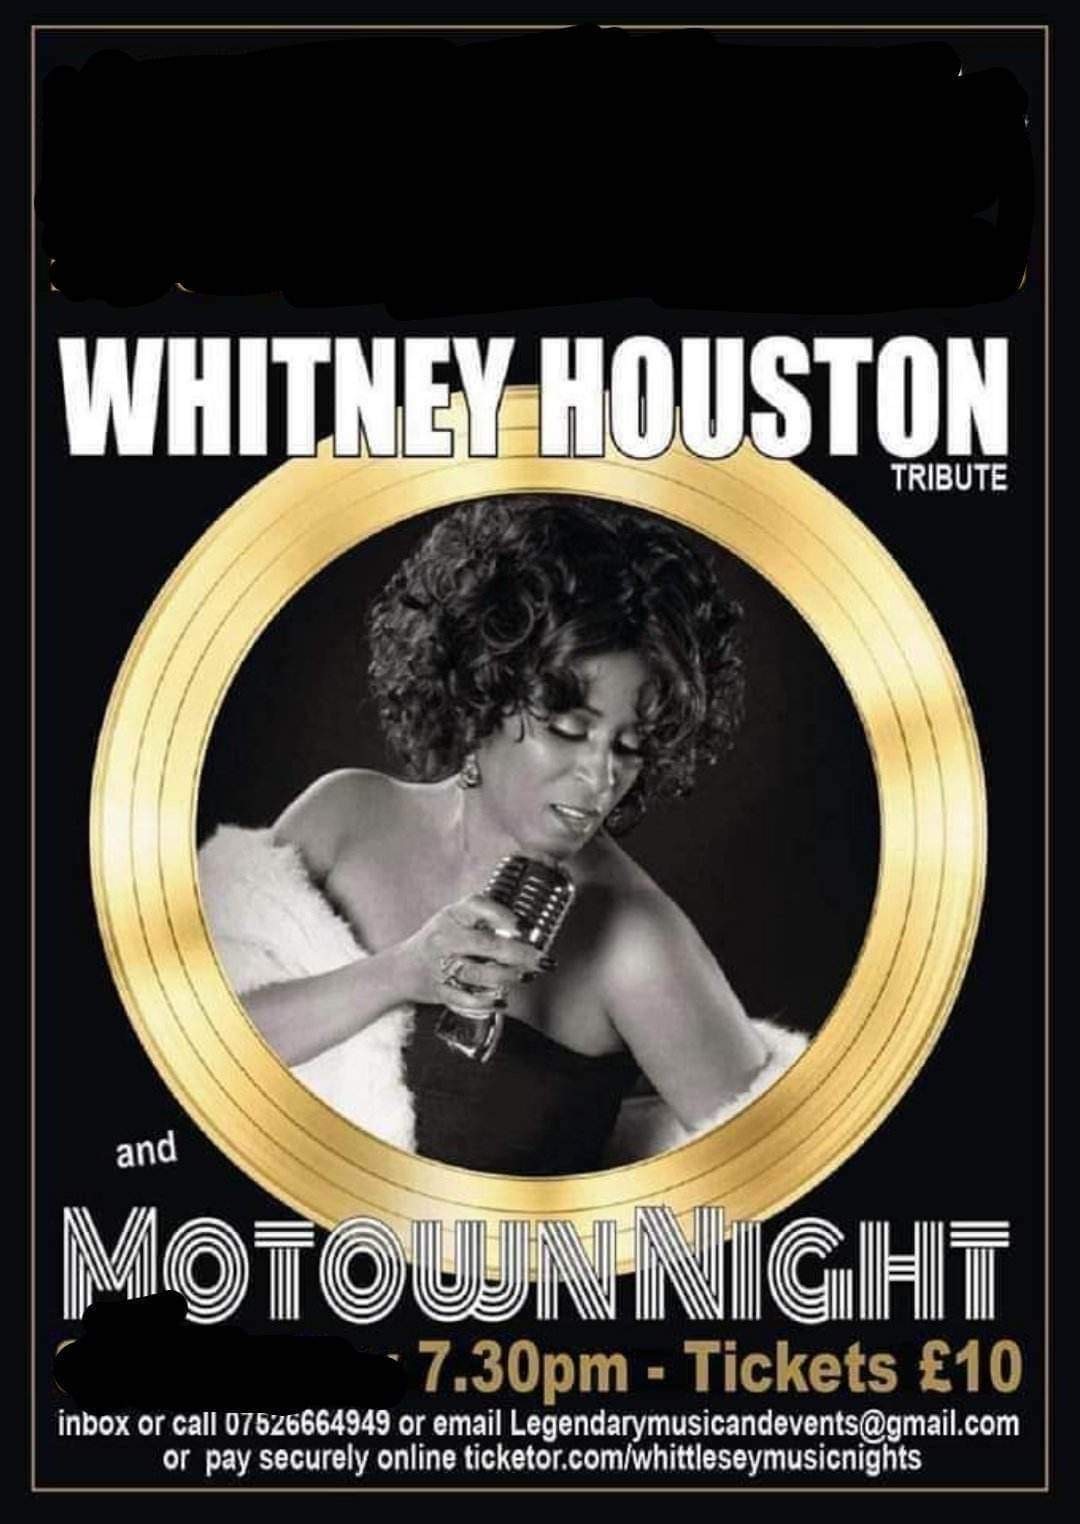 Whitney Houston Tribute Night  on Aug 19, 19:30@Leverington Sports and Social Club - Buy tickets and Get information on whittlesey music nights 